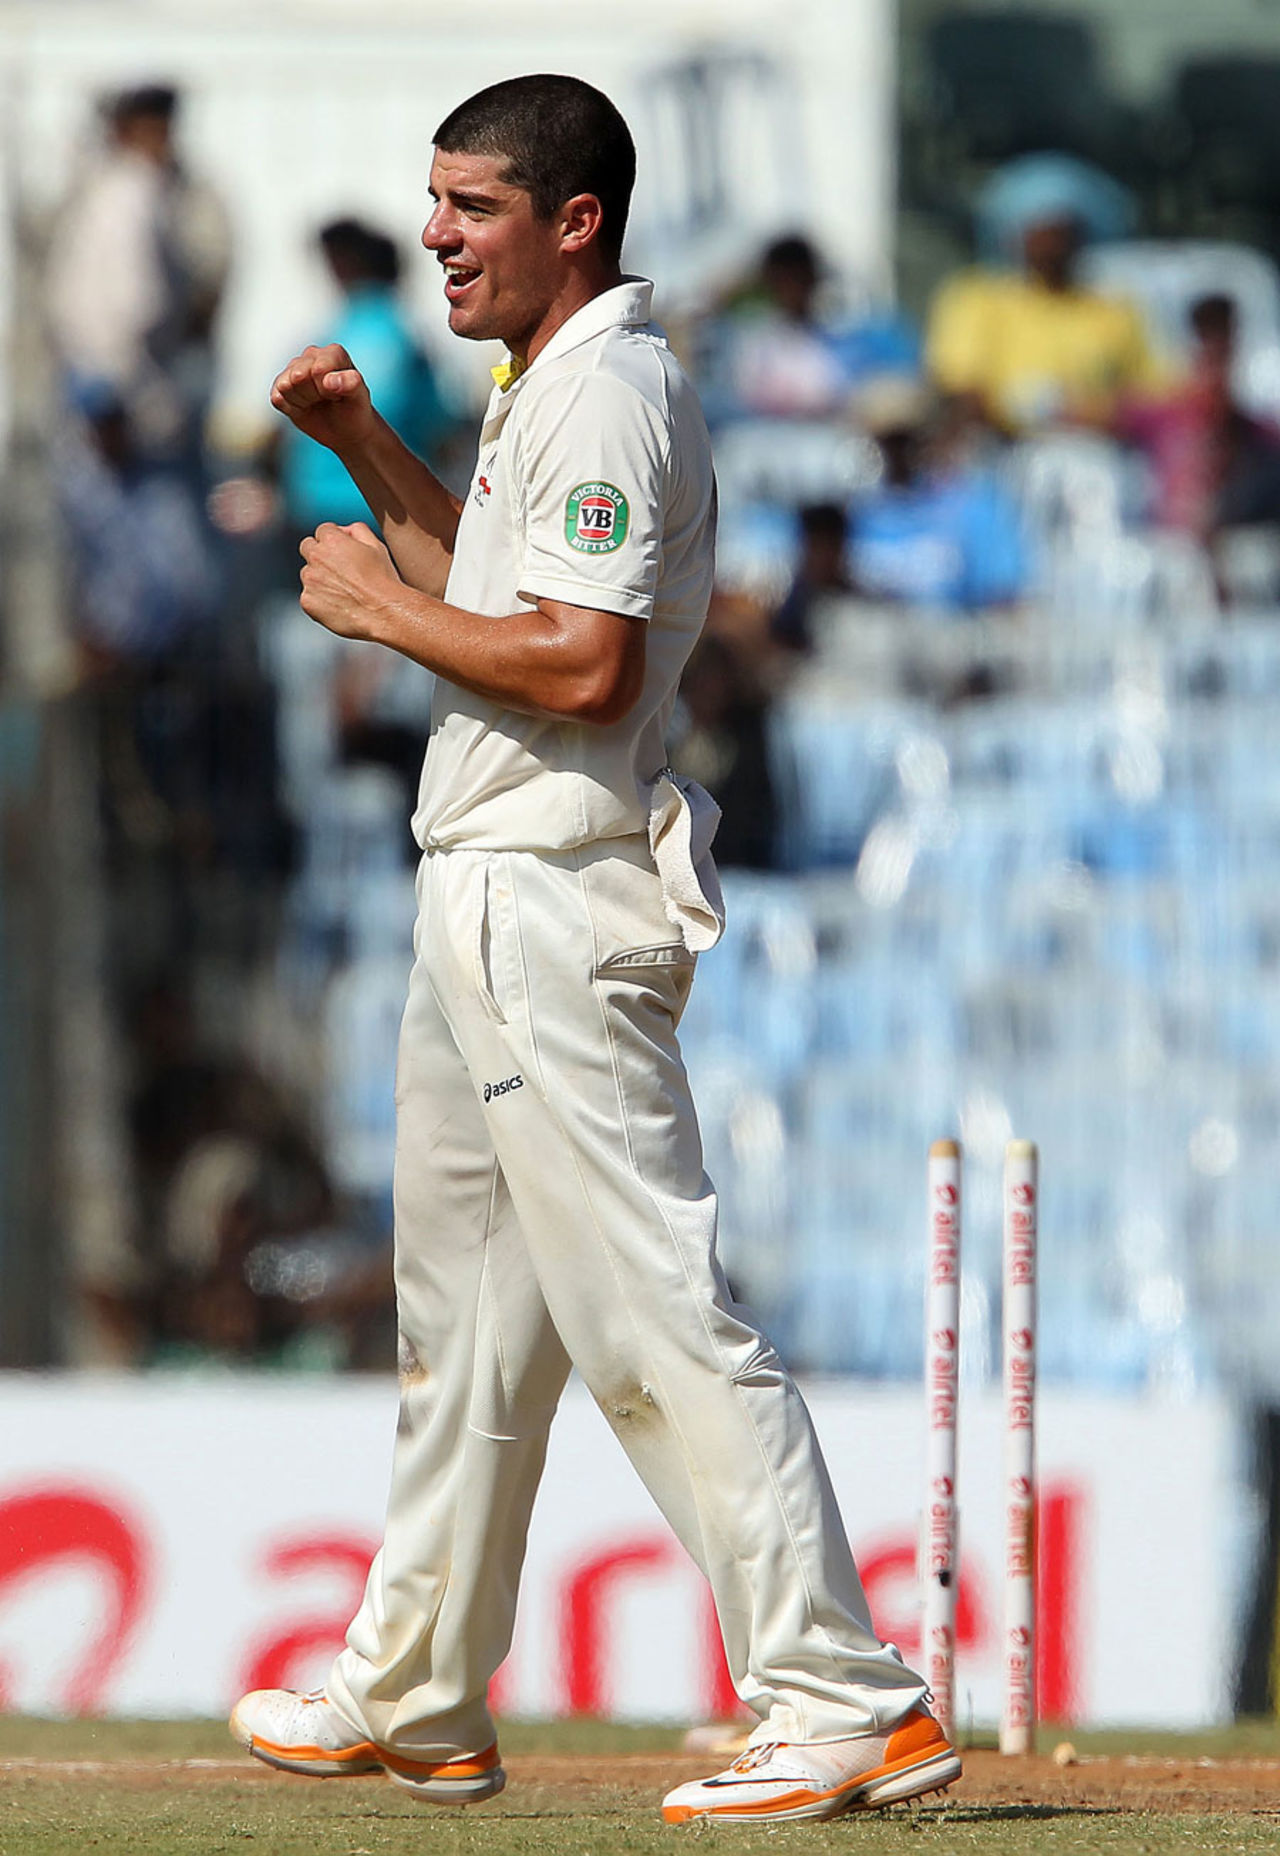 Moises Henriques claimed his maiden Test wicket, India v Australia, 1st Test, Chennai, 3rd day, February 24, 2013